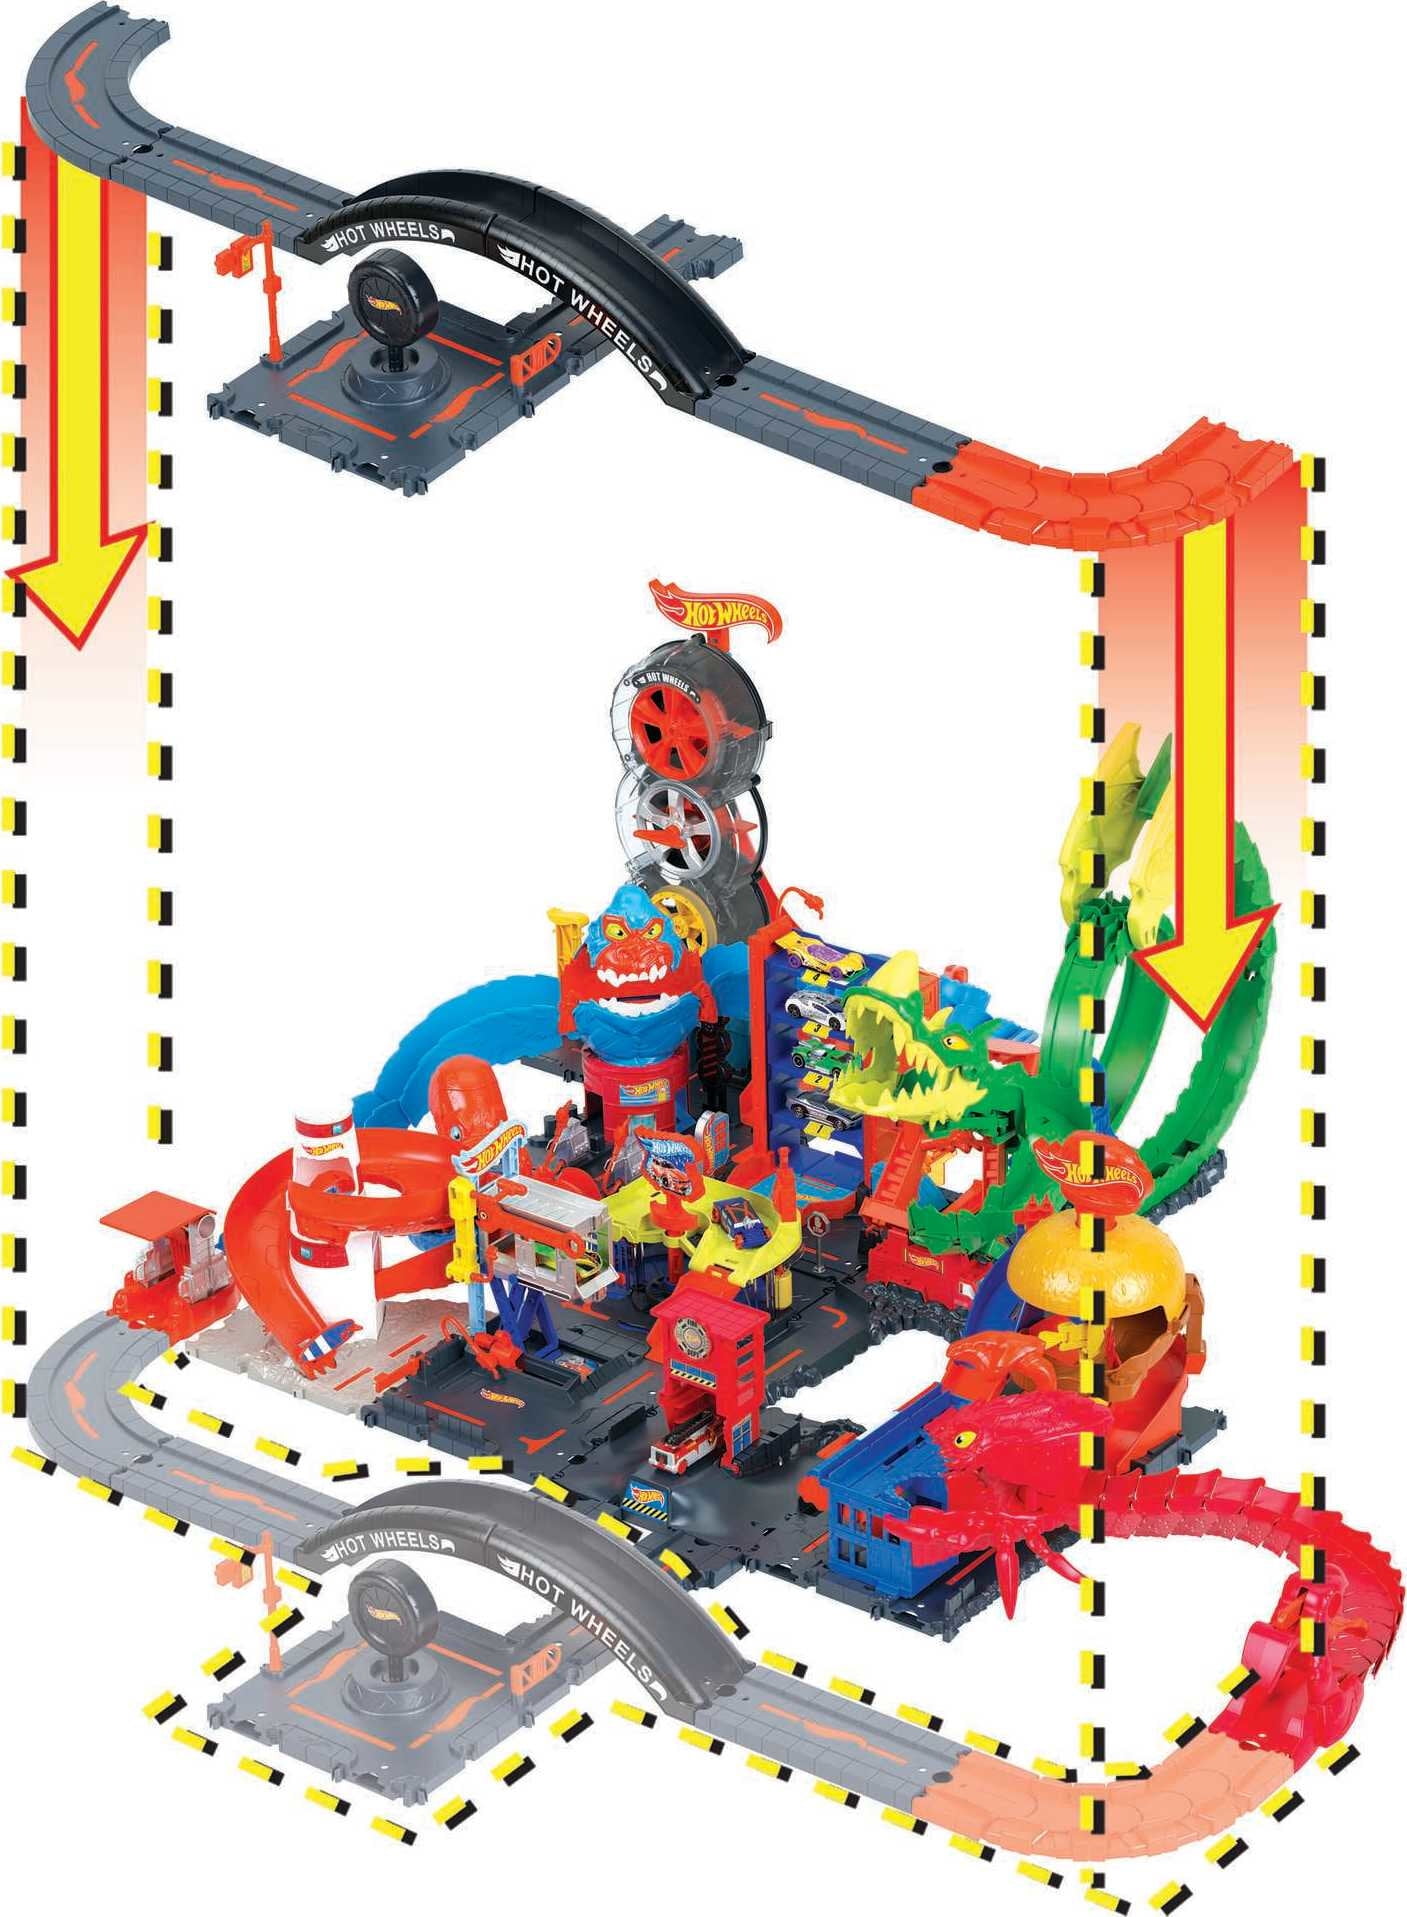 10 Piece Set Includes Track Base & Various Track Pieces to Build a Cityscape Connects to Other Sets Hot Wheels City Track Pack with 1 Car Gift for Kids 4 Years & Up 